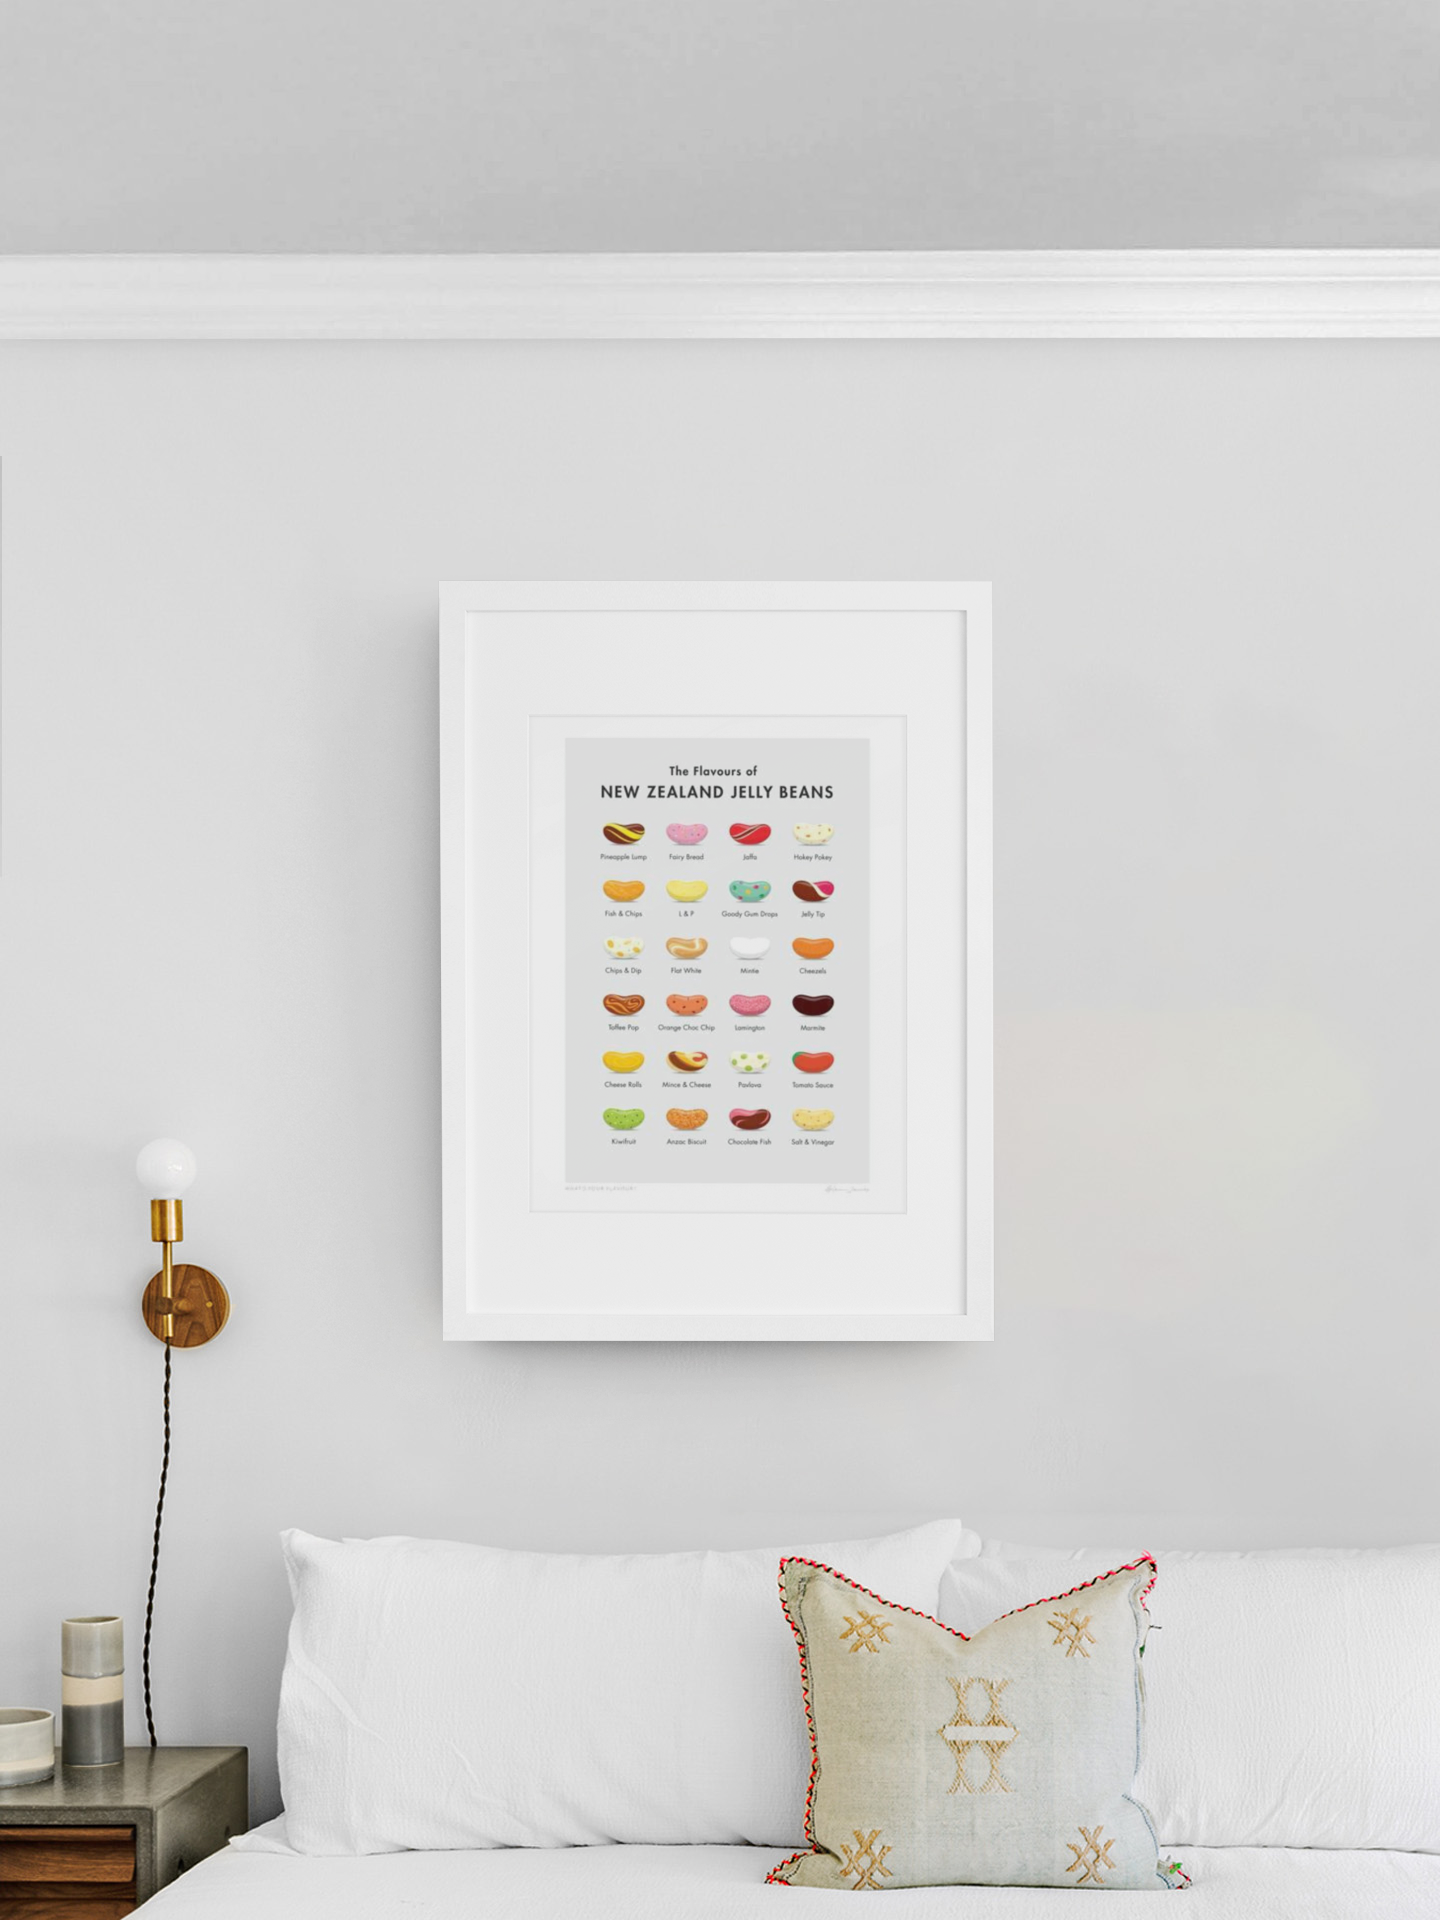 A clean and minimalistic room featuring a framed poster of "What's Your Flavour? by Glenn Jones" with colorful illustrations hung on a plain white wall above a cozy white sofa with an ornate pillow. The poster highlights Glenn Jones.